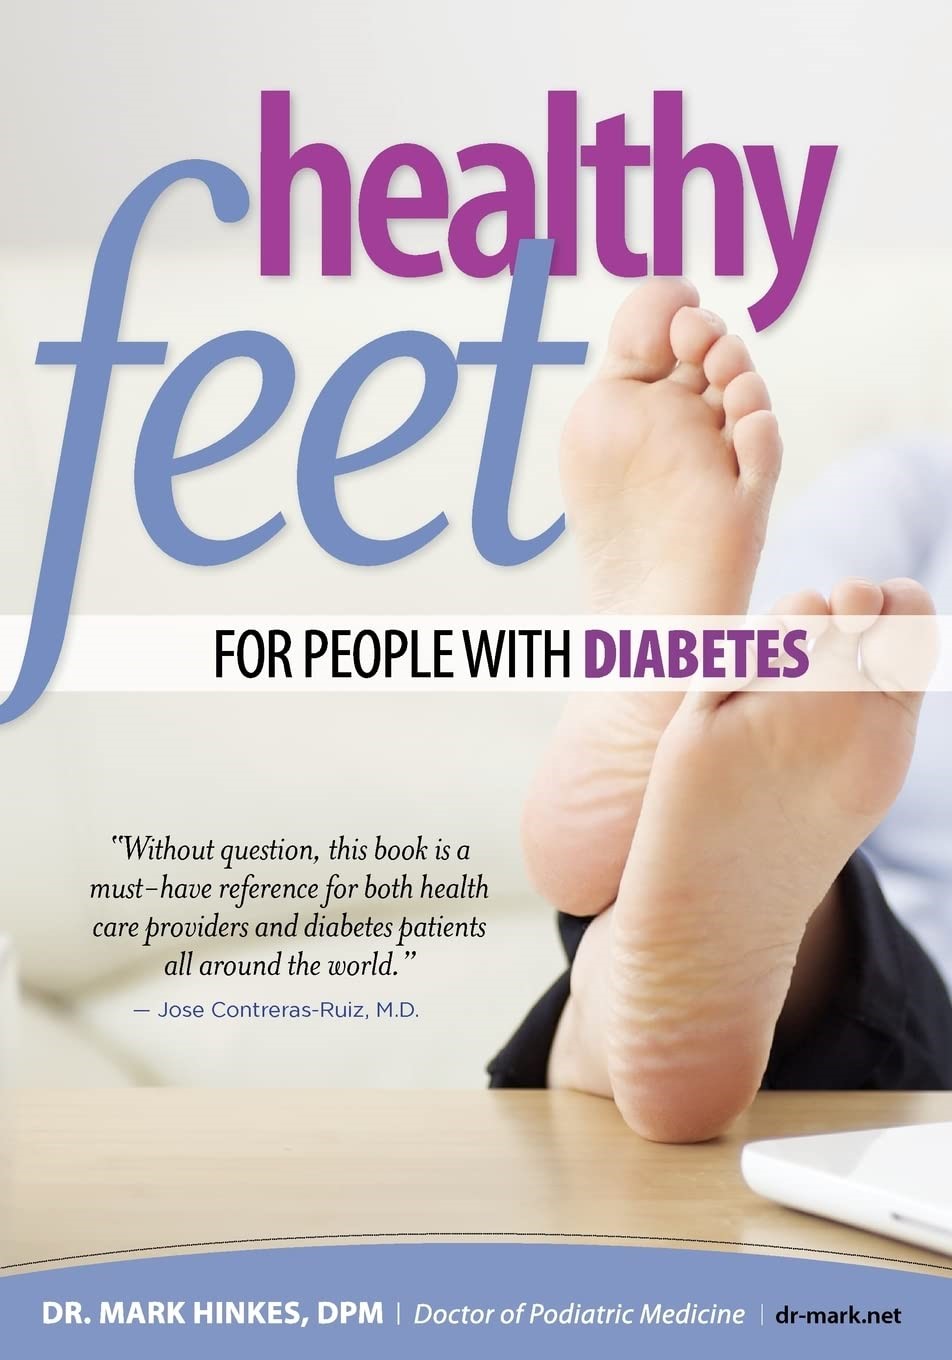 Healthy Feet for People With Diabetes